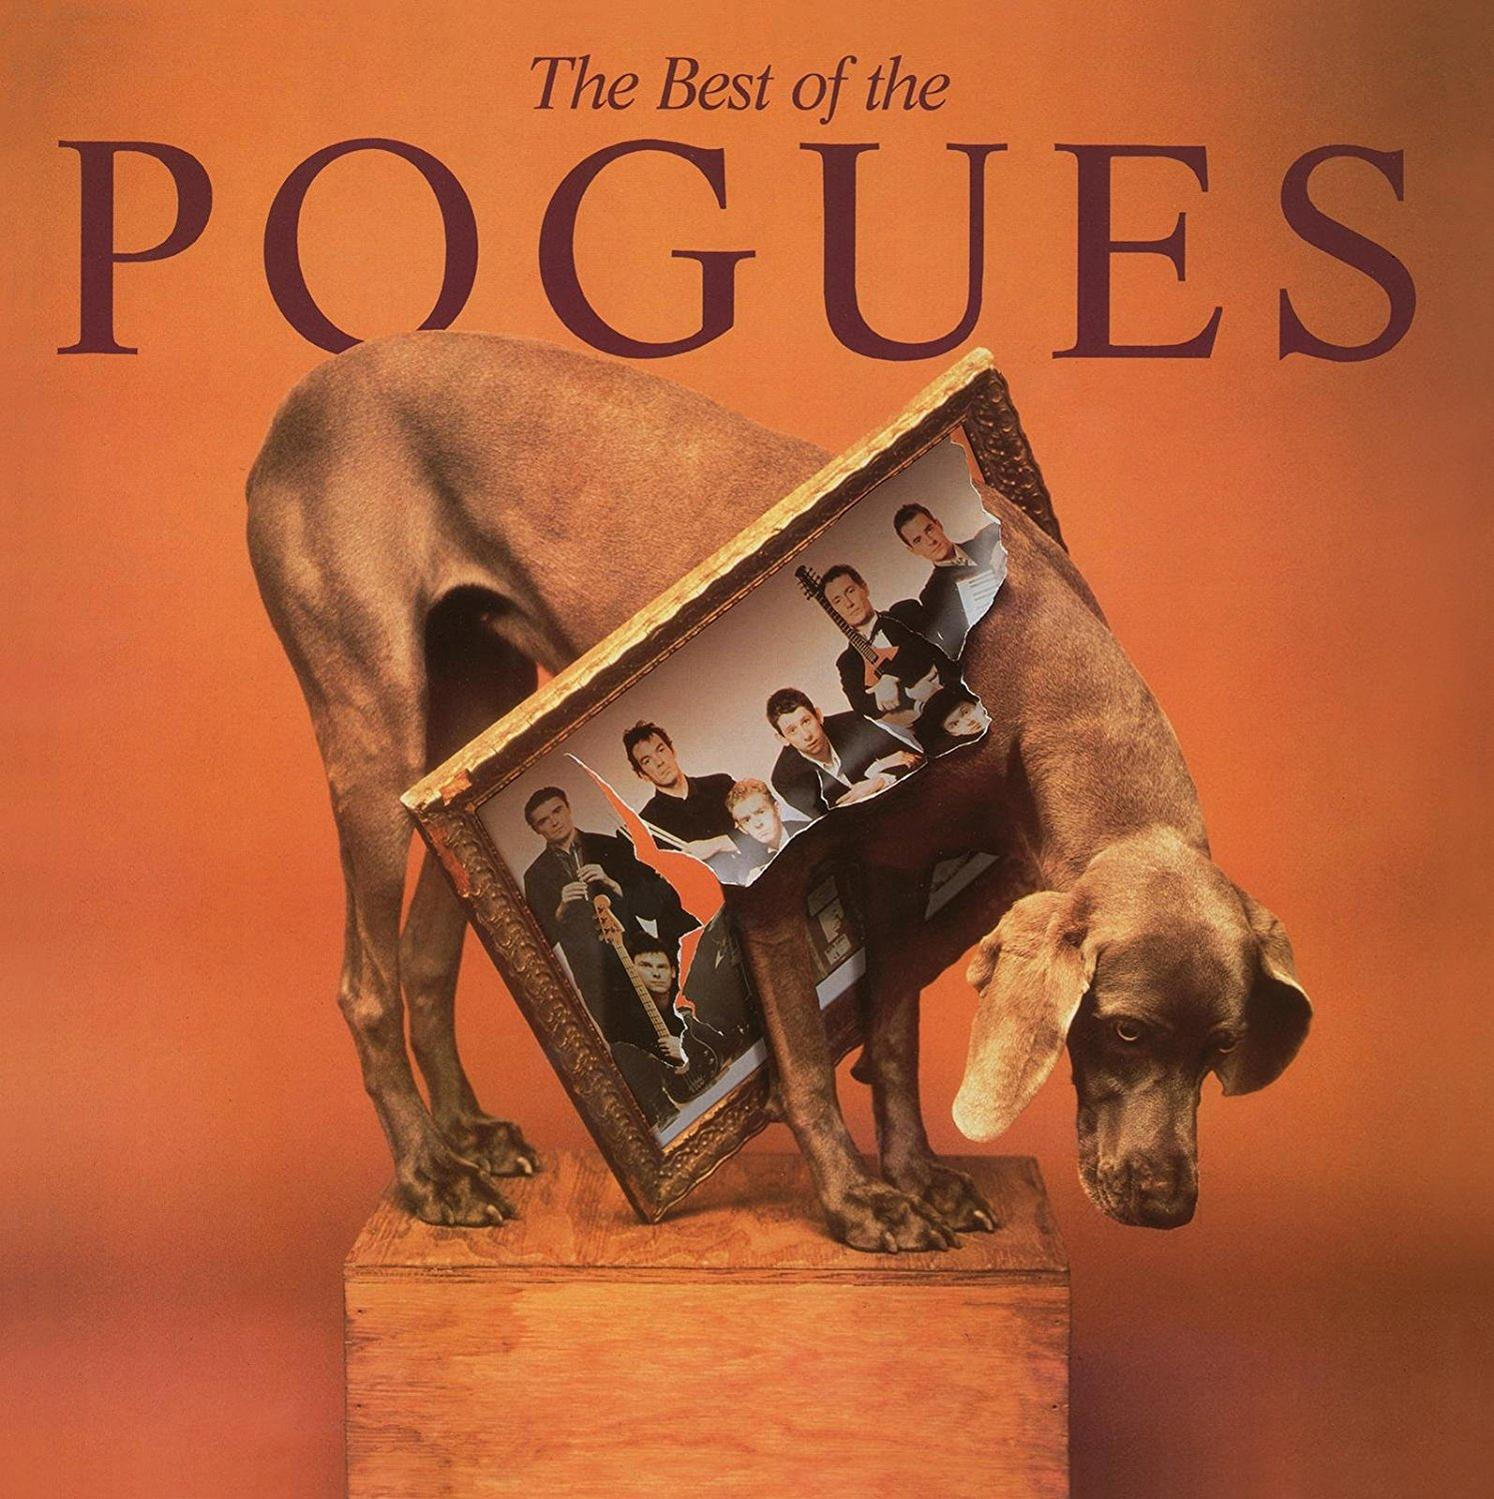 The Pogues - - of The Pogues Best The (Vinyl)